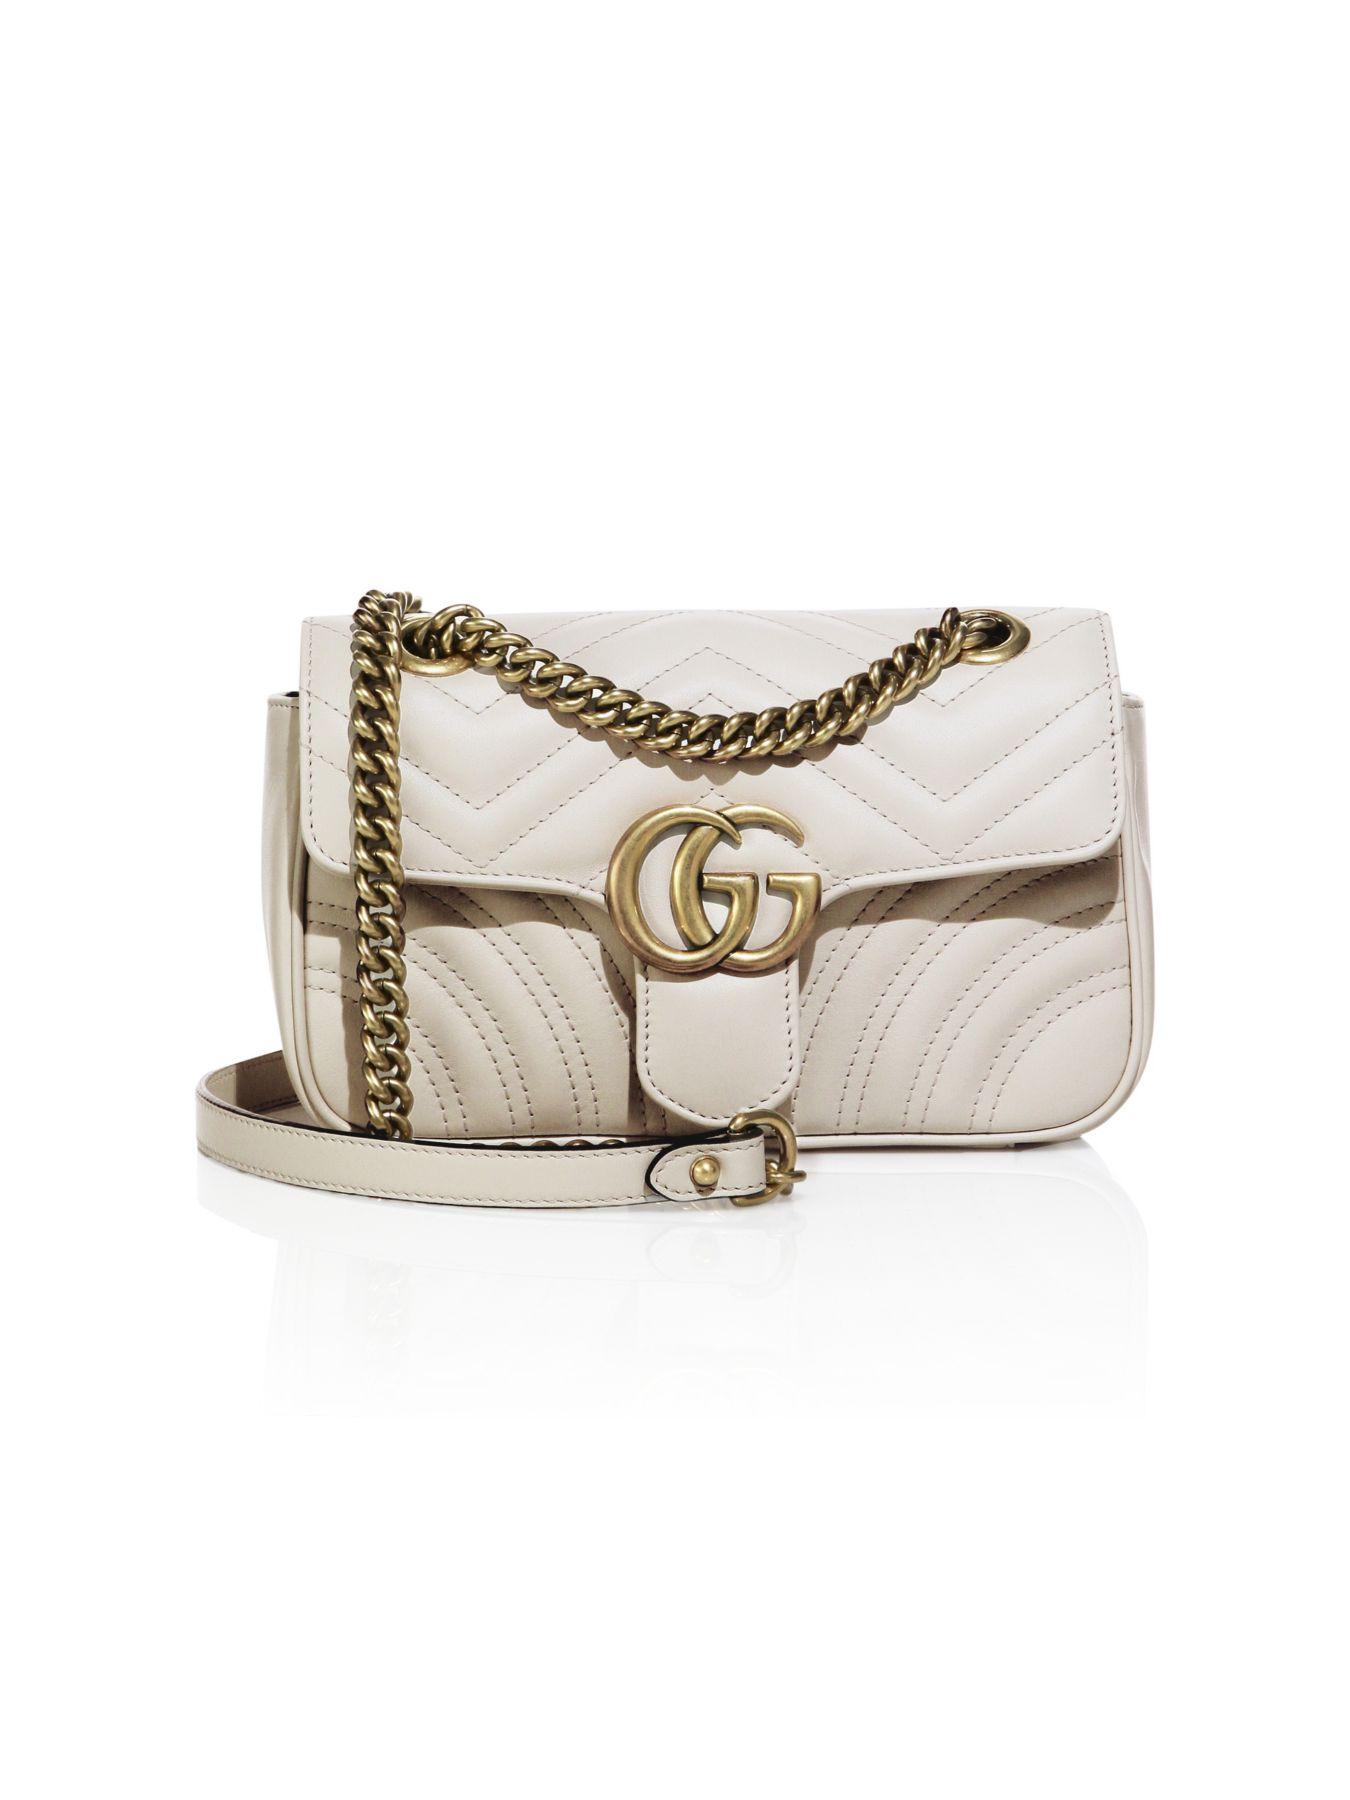 Gucci GG Marmont Mini Quilted Leather Shoulder Bag in White - Save 16% - Lyst